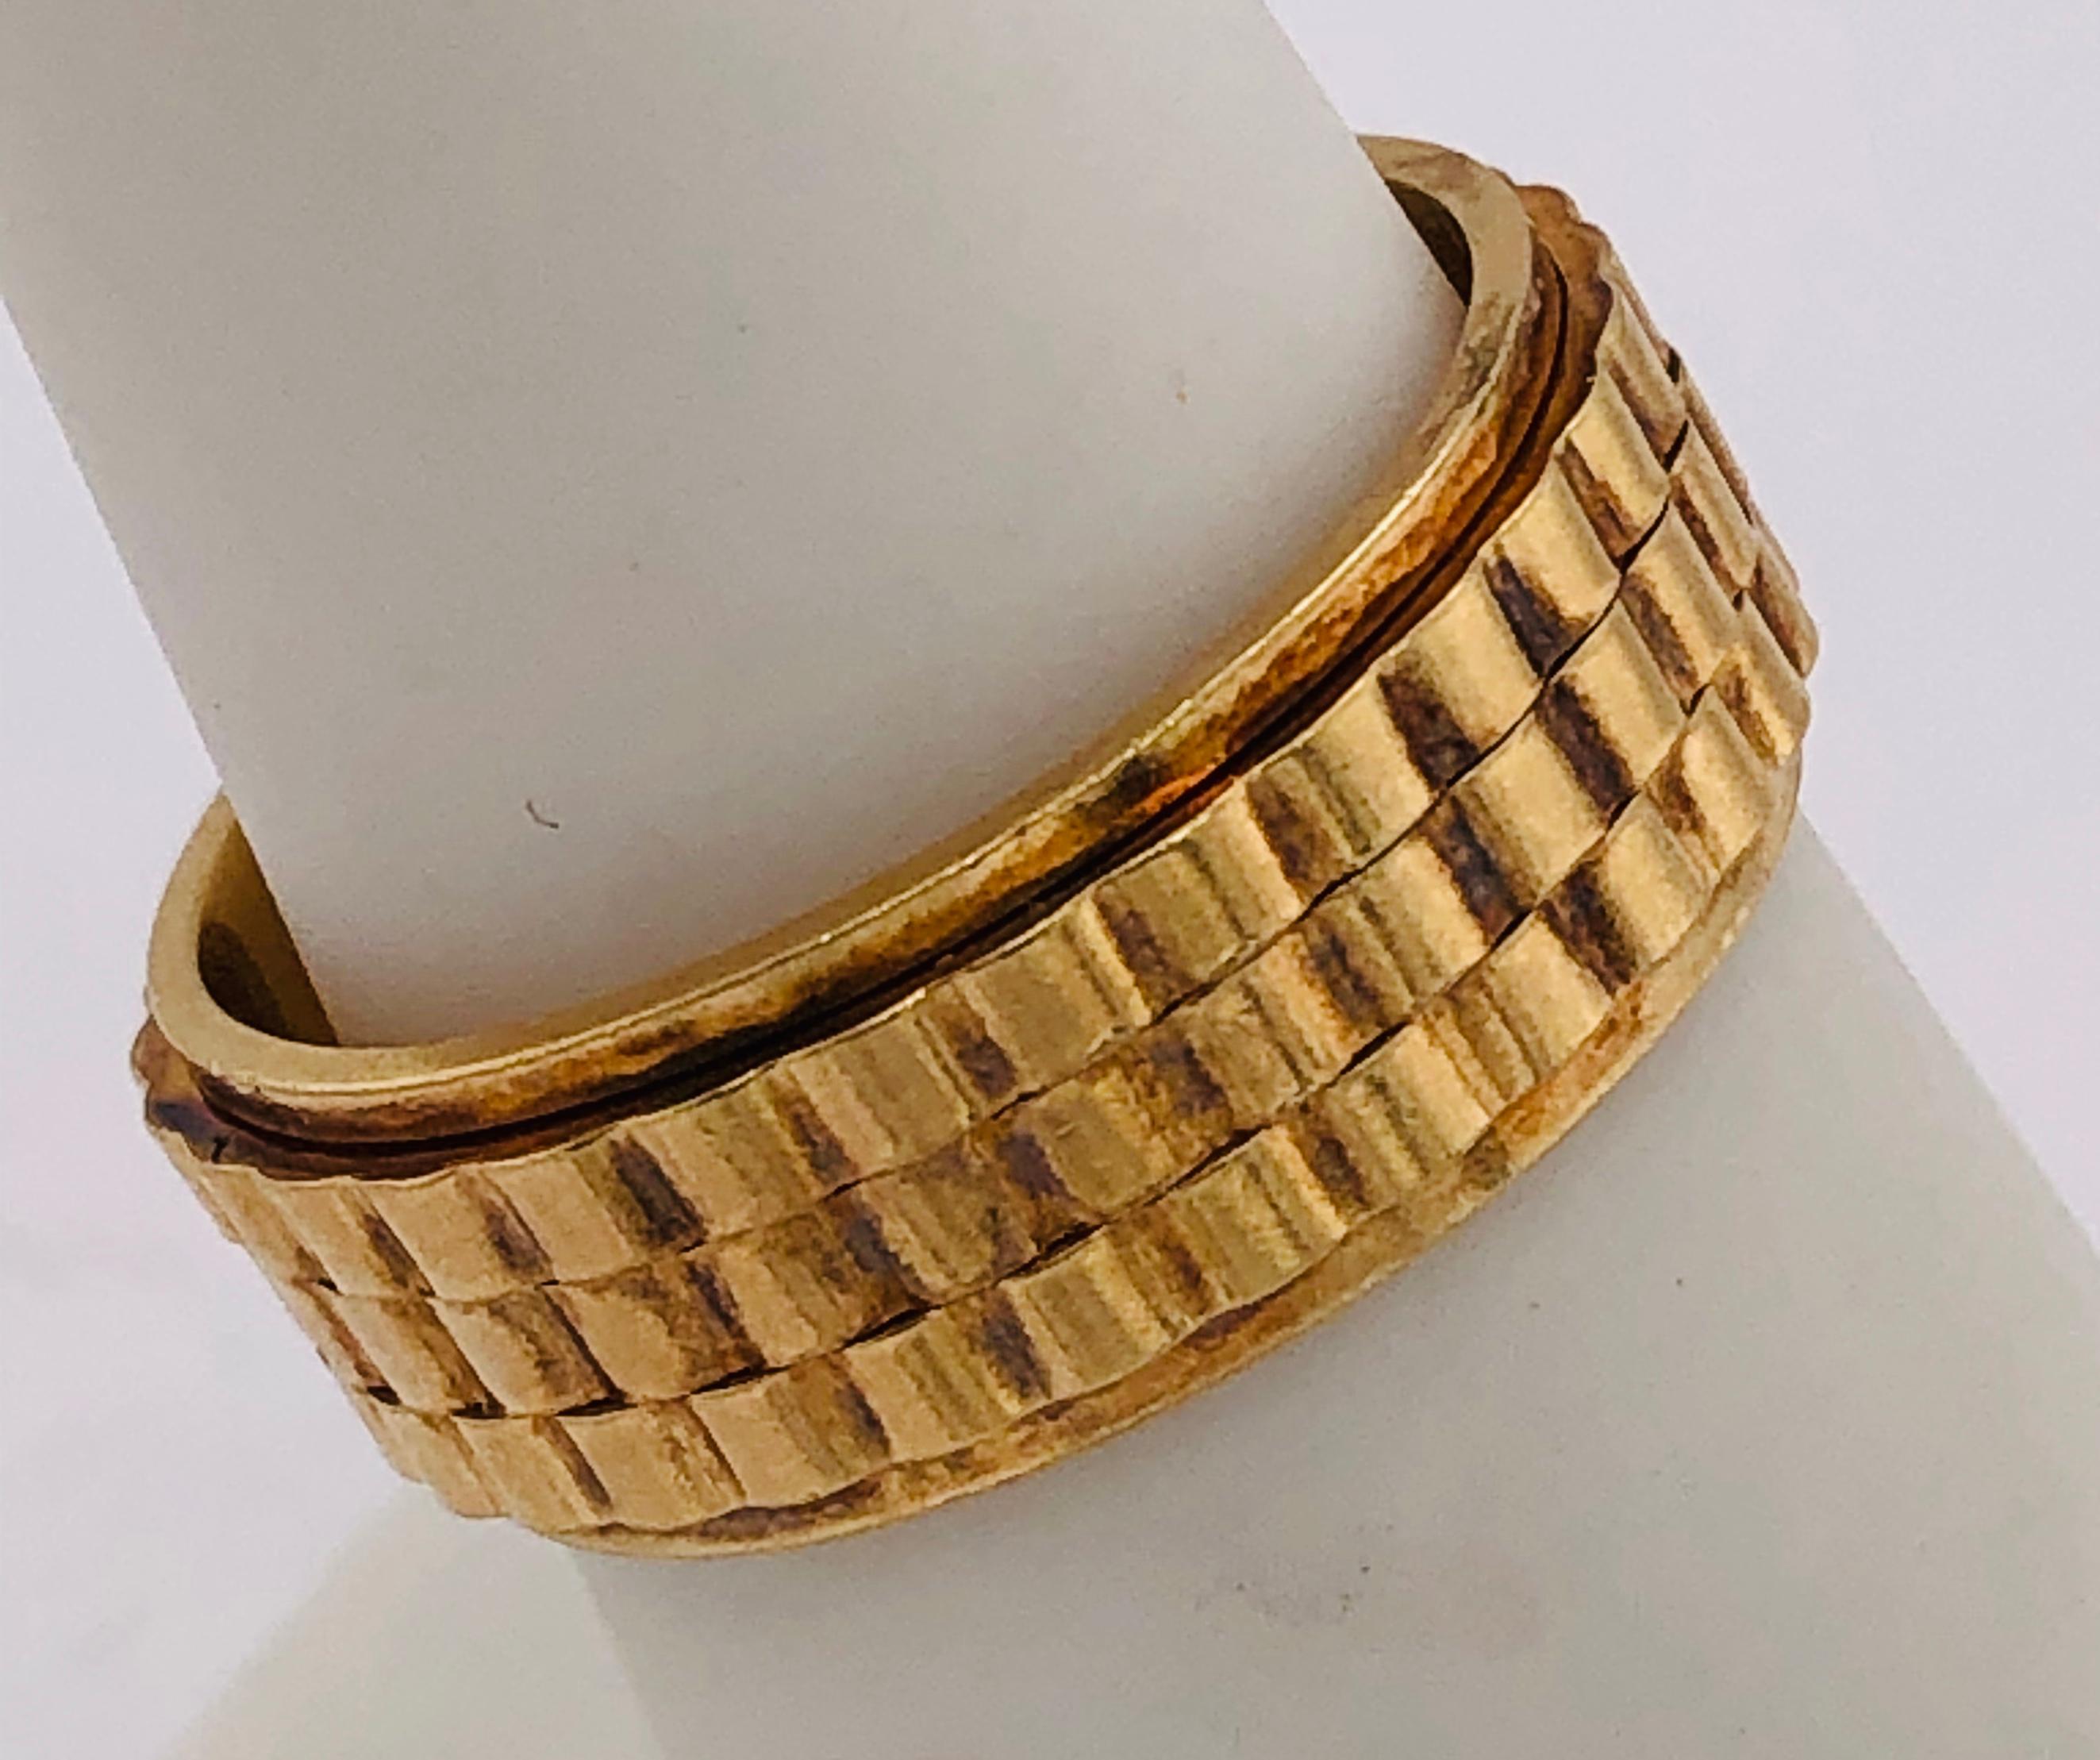 14 Karat Yellow Gold Band Ring or Wedding Ring Weave Design In Good Condition For Sale In Stamford, CT